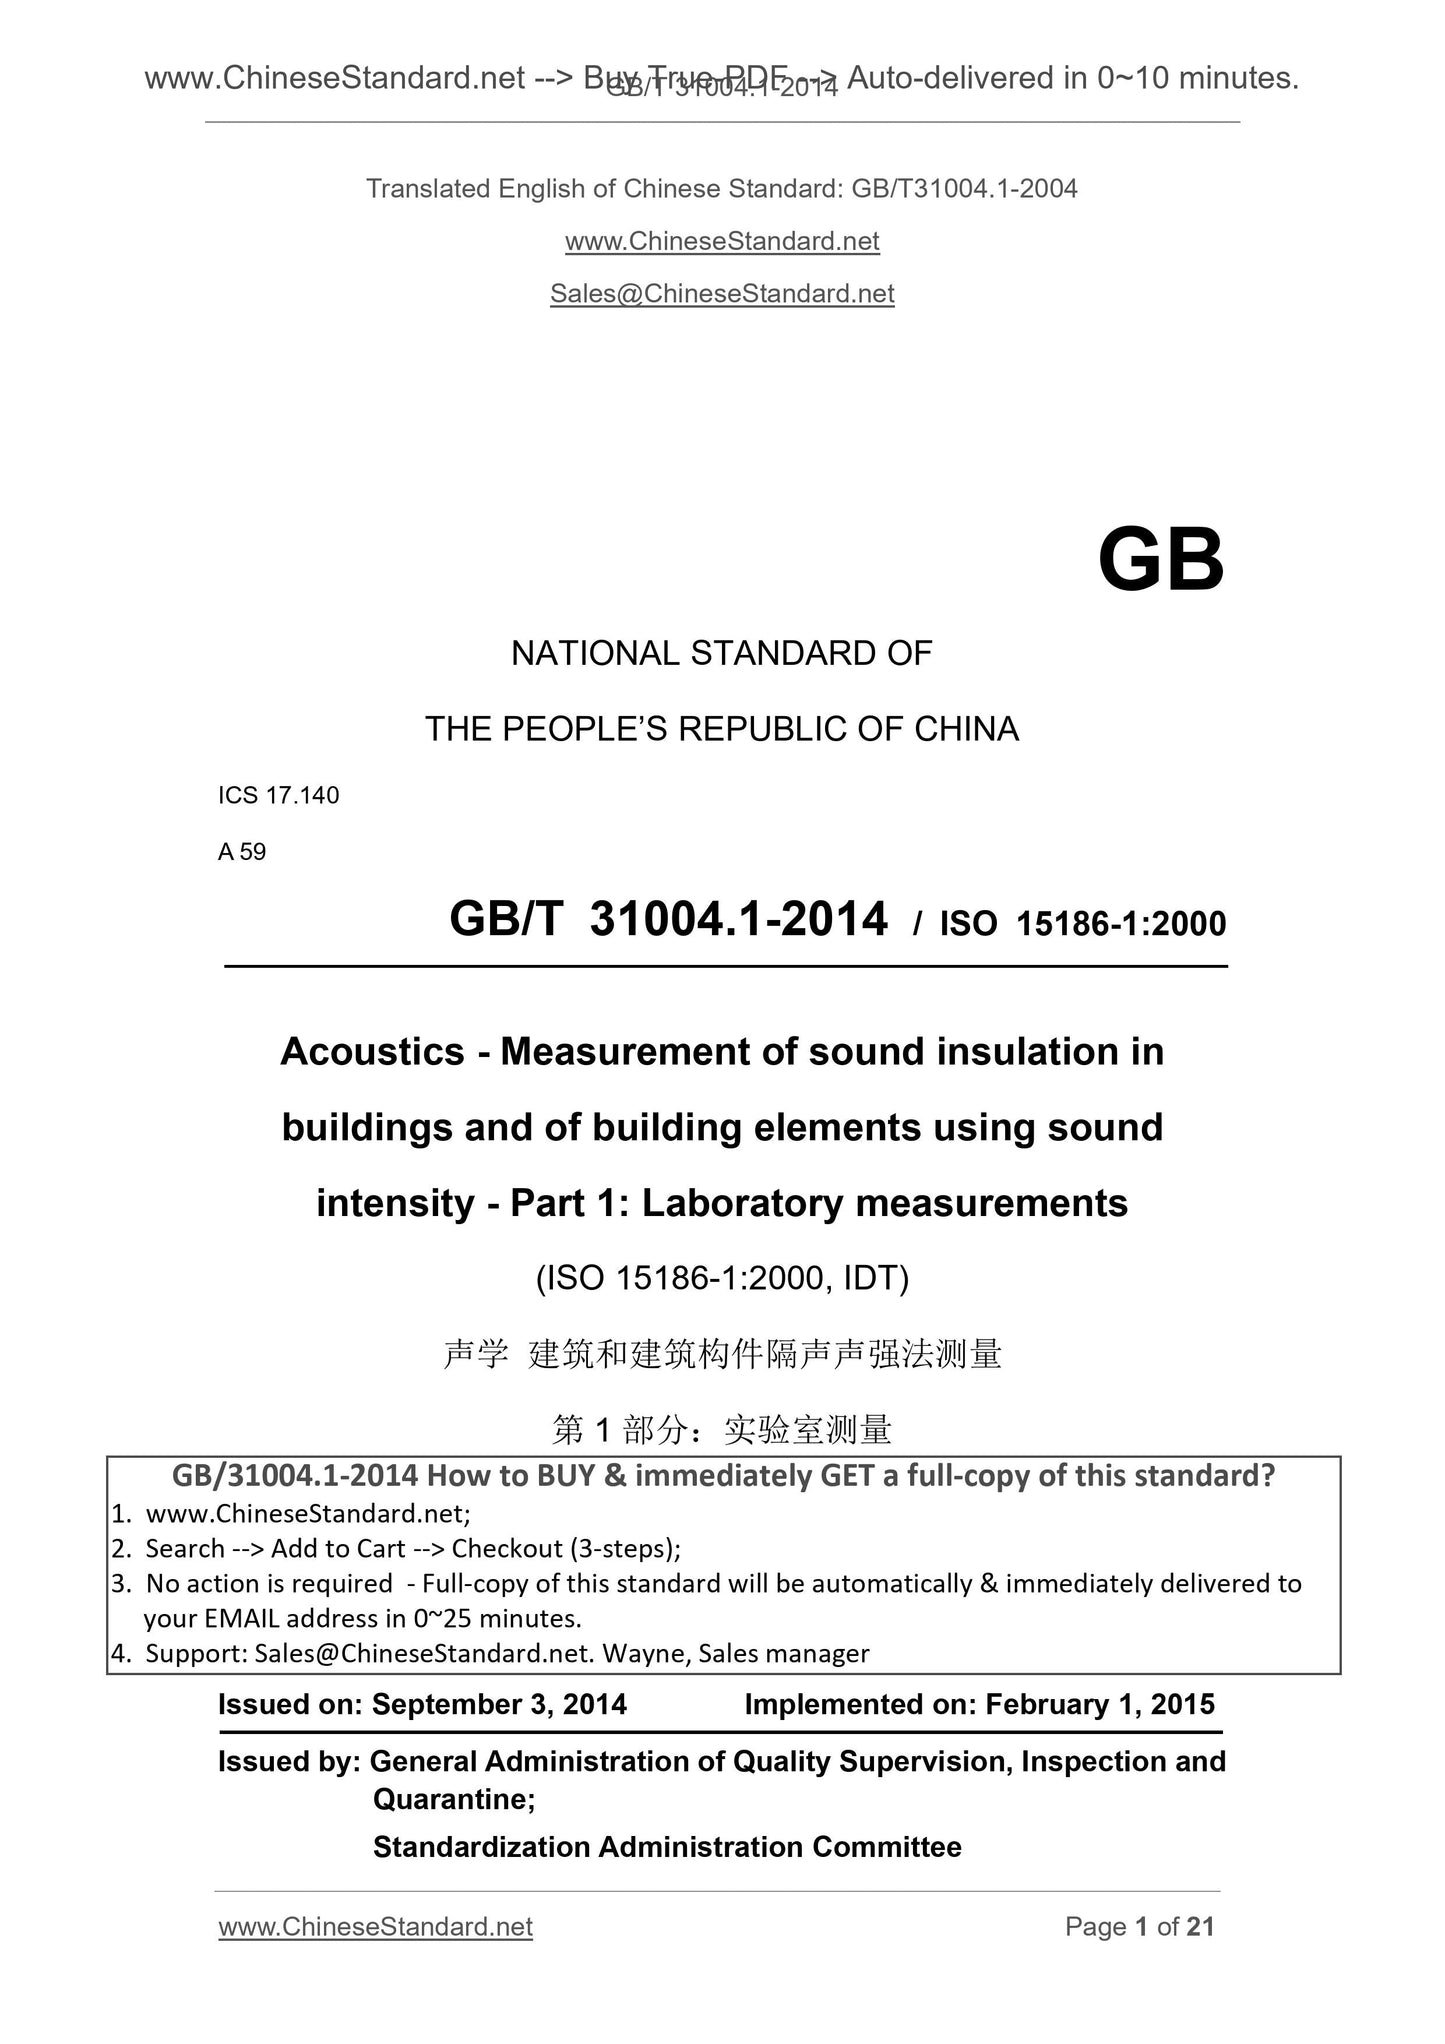 GB/T 31004.1-2014 Page 1